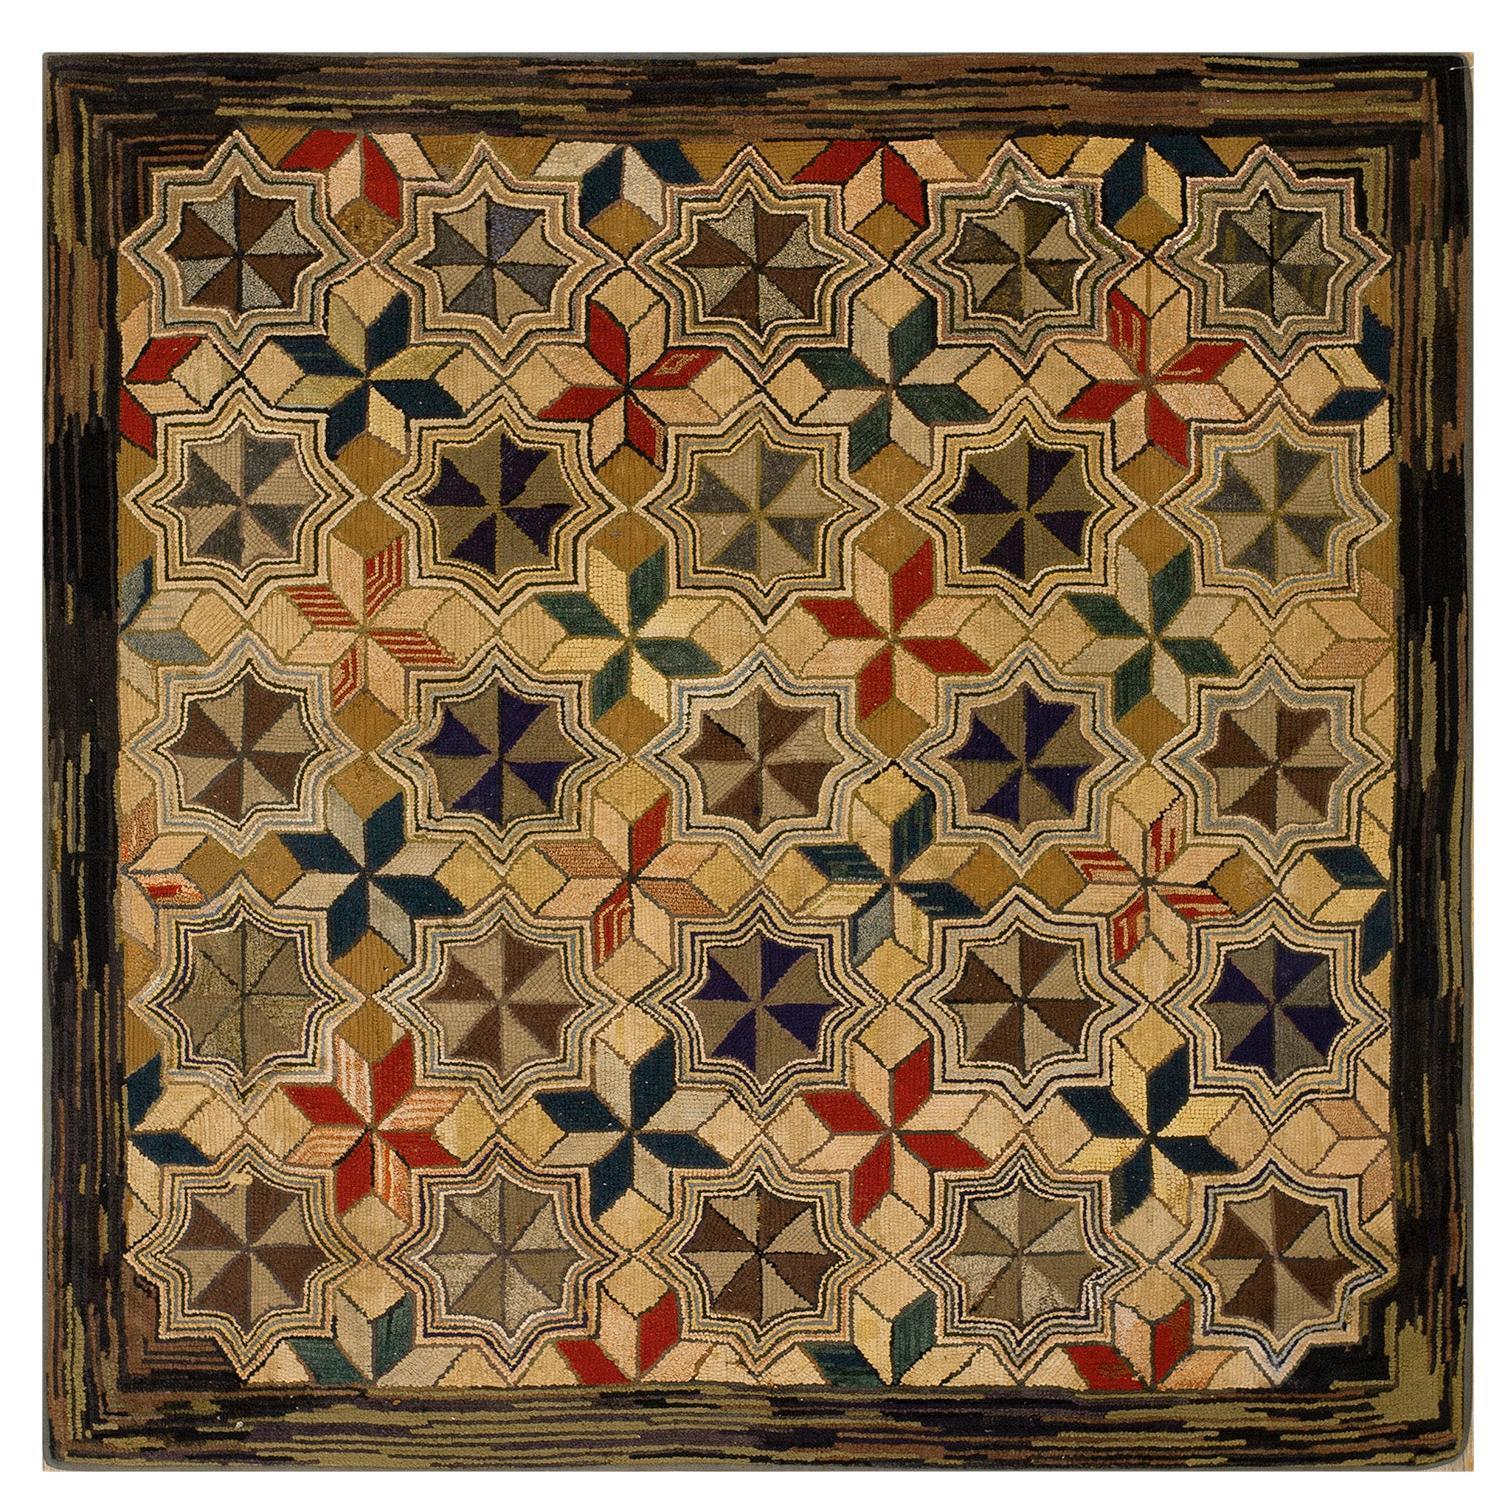 Early 20th Century American Hooked Rug ( 5' 9'' x 6'  - 175 x 182 cm )